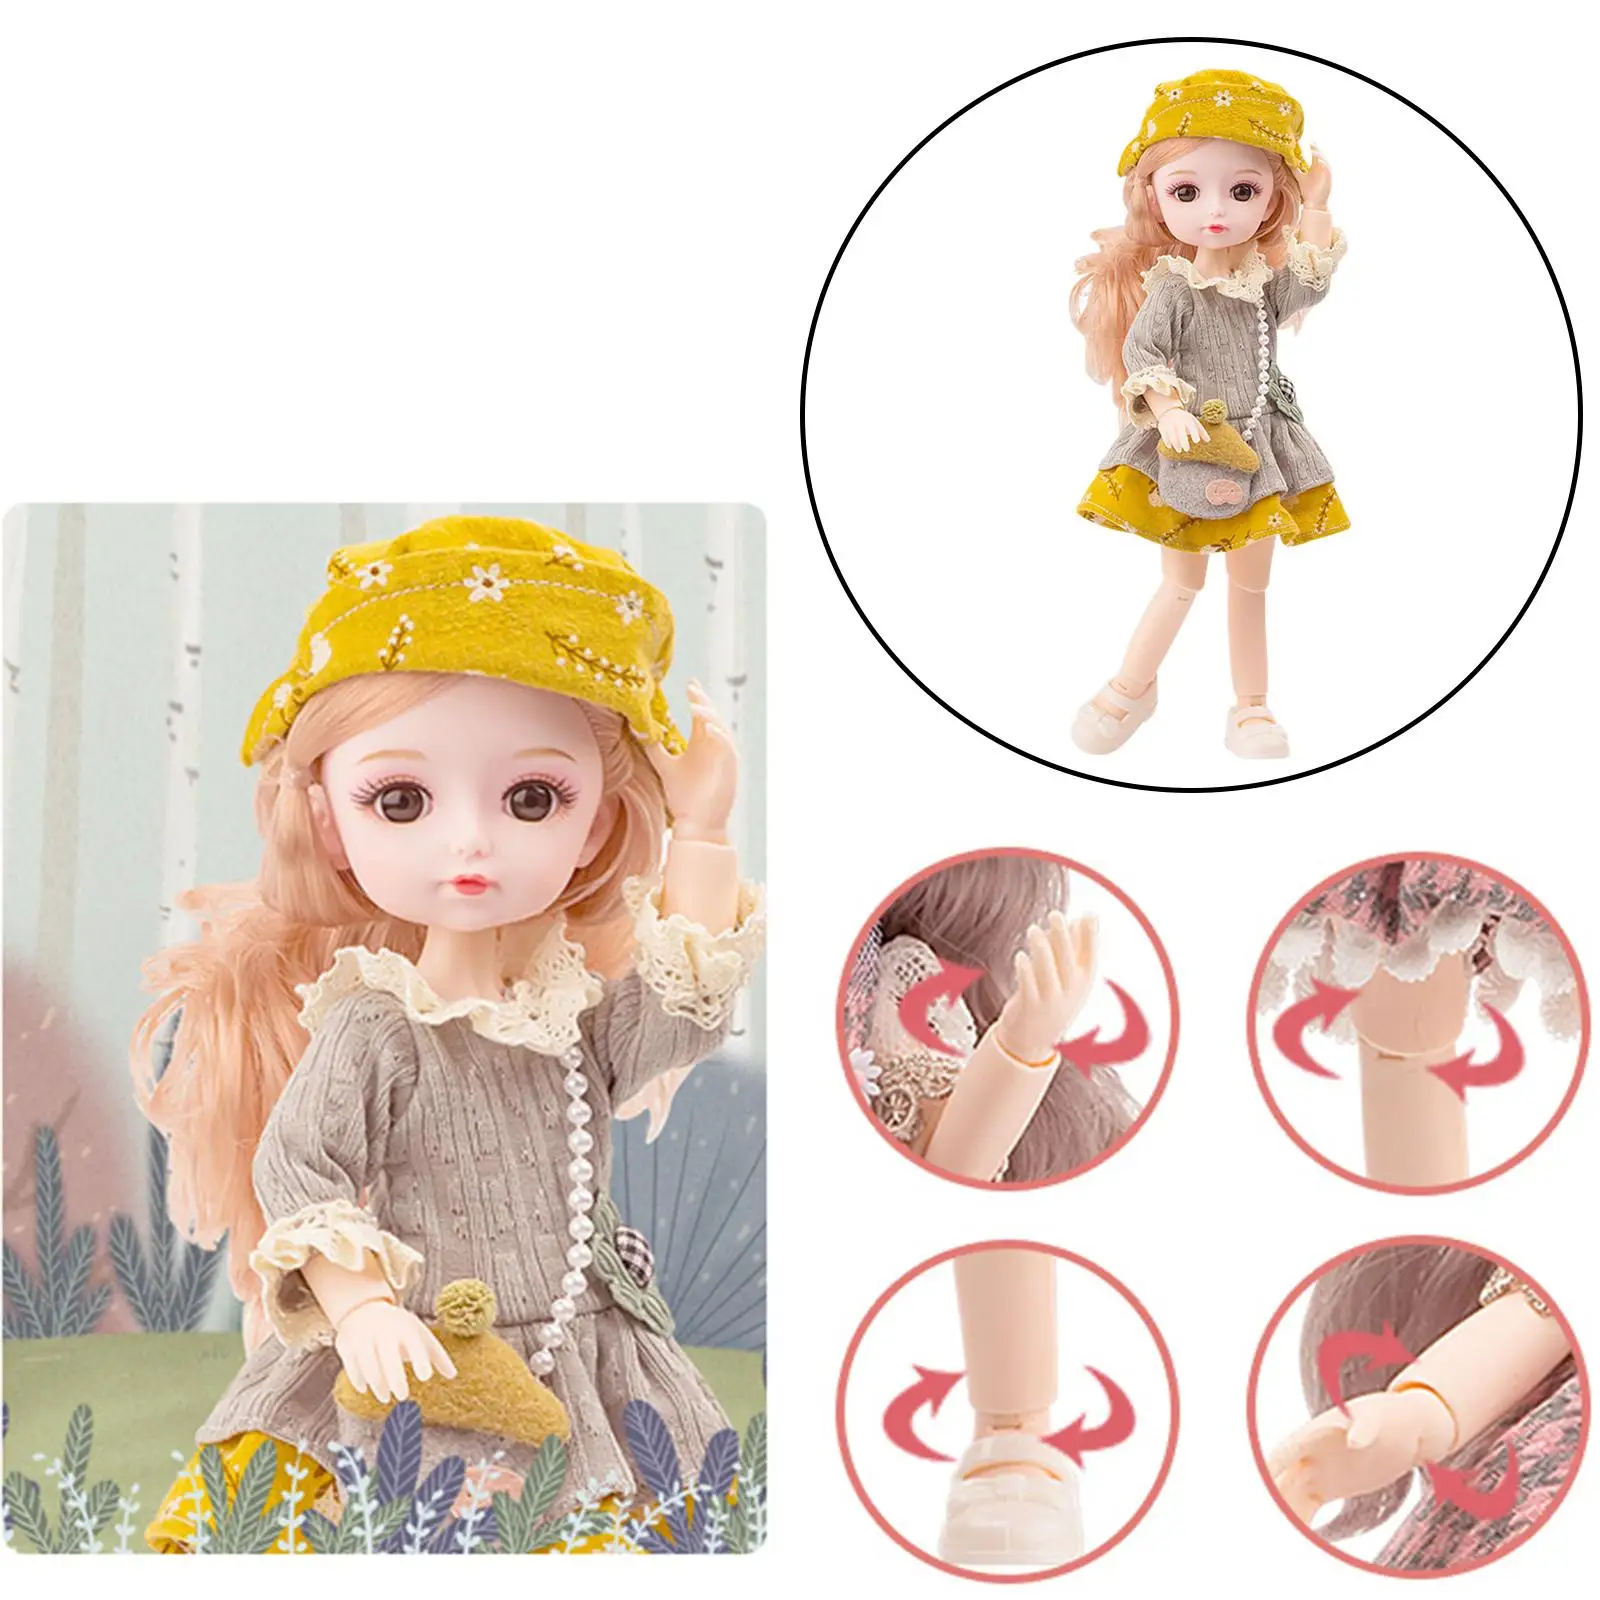 Adorable 13 Moveable Joint, 26cm  Doll with Dress  Full Set, Makeup  Doll, Ball Joint Doll Toys for Girls Collection